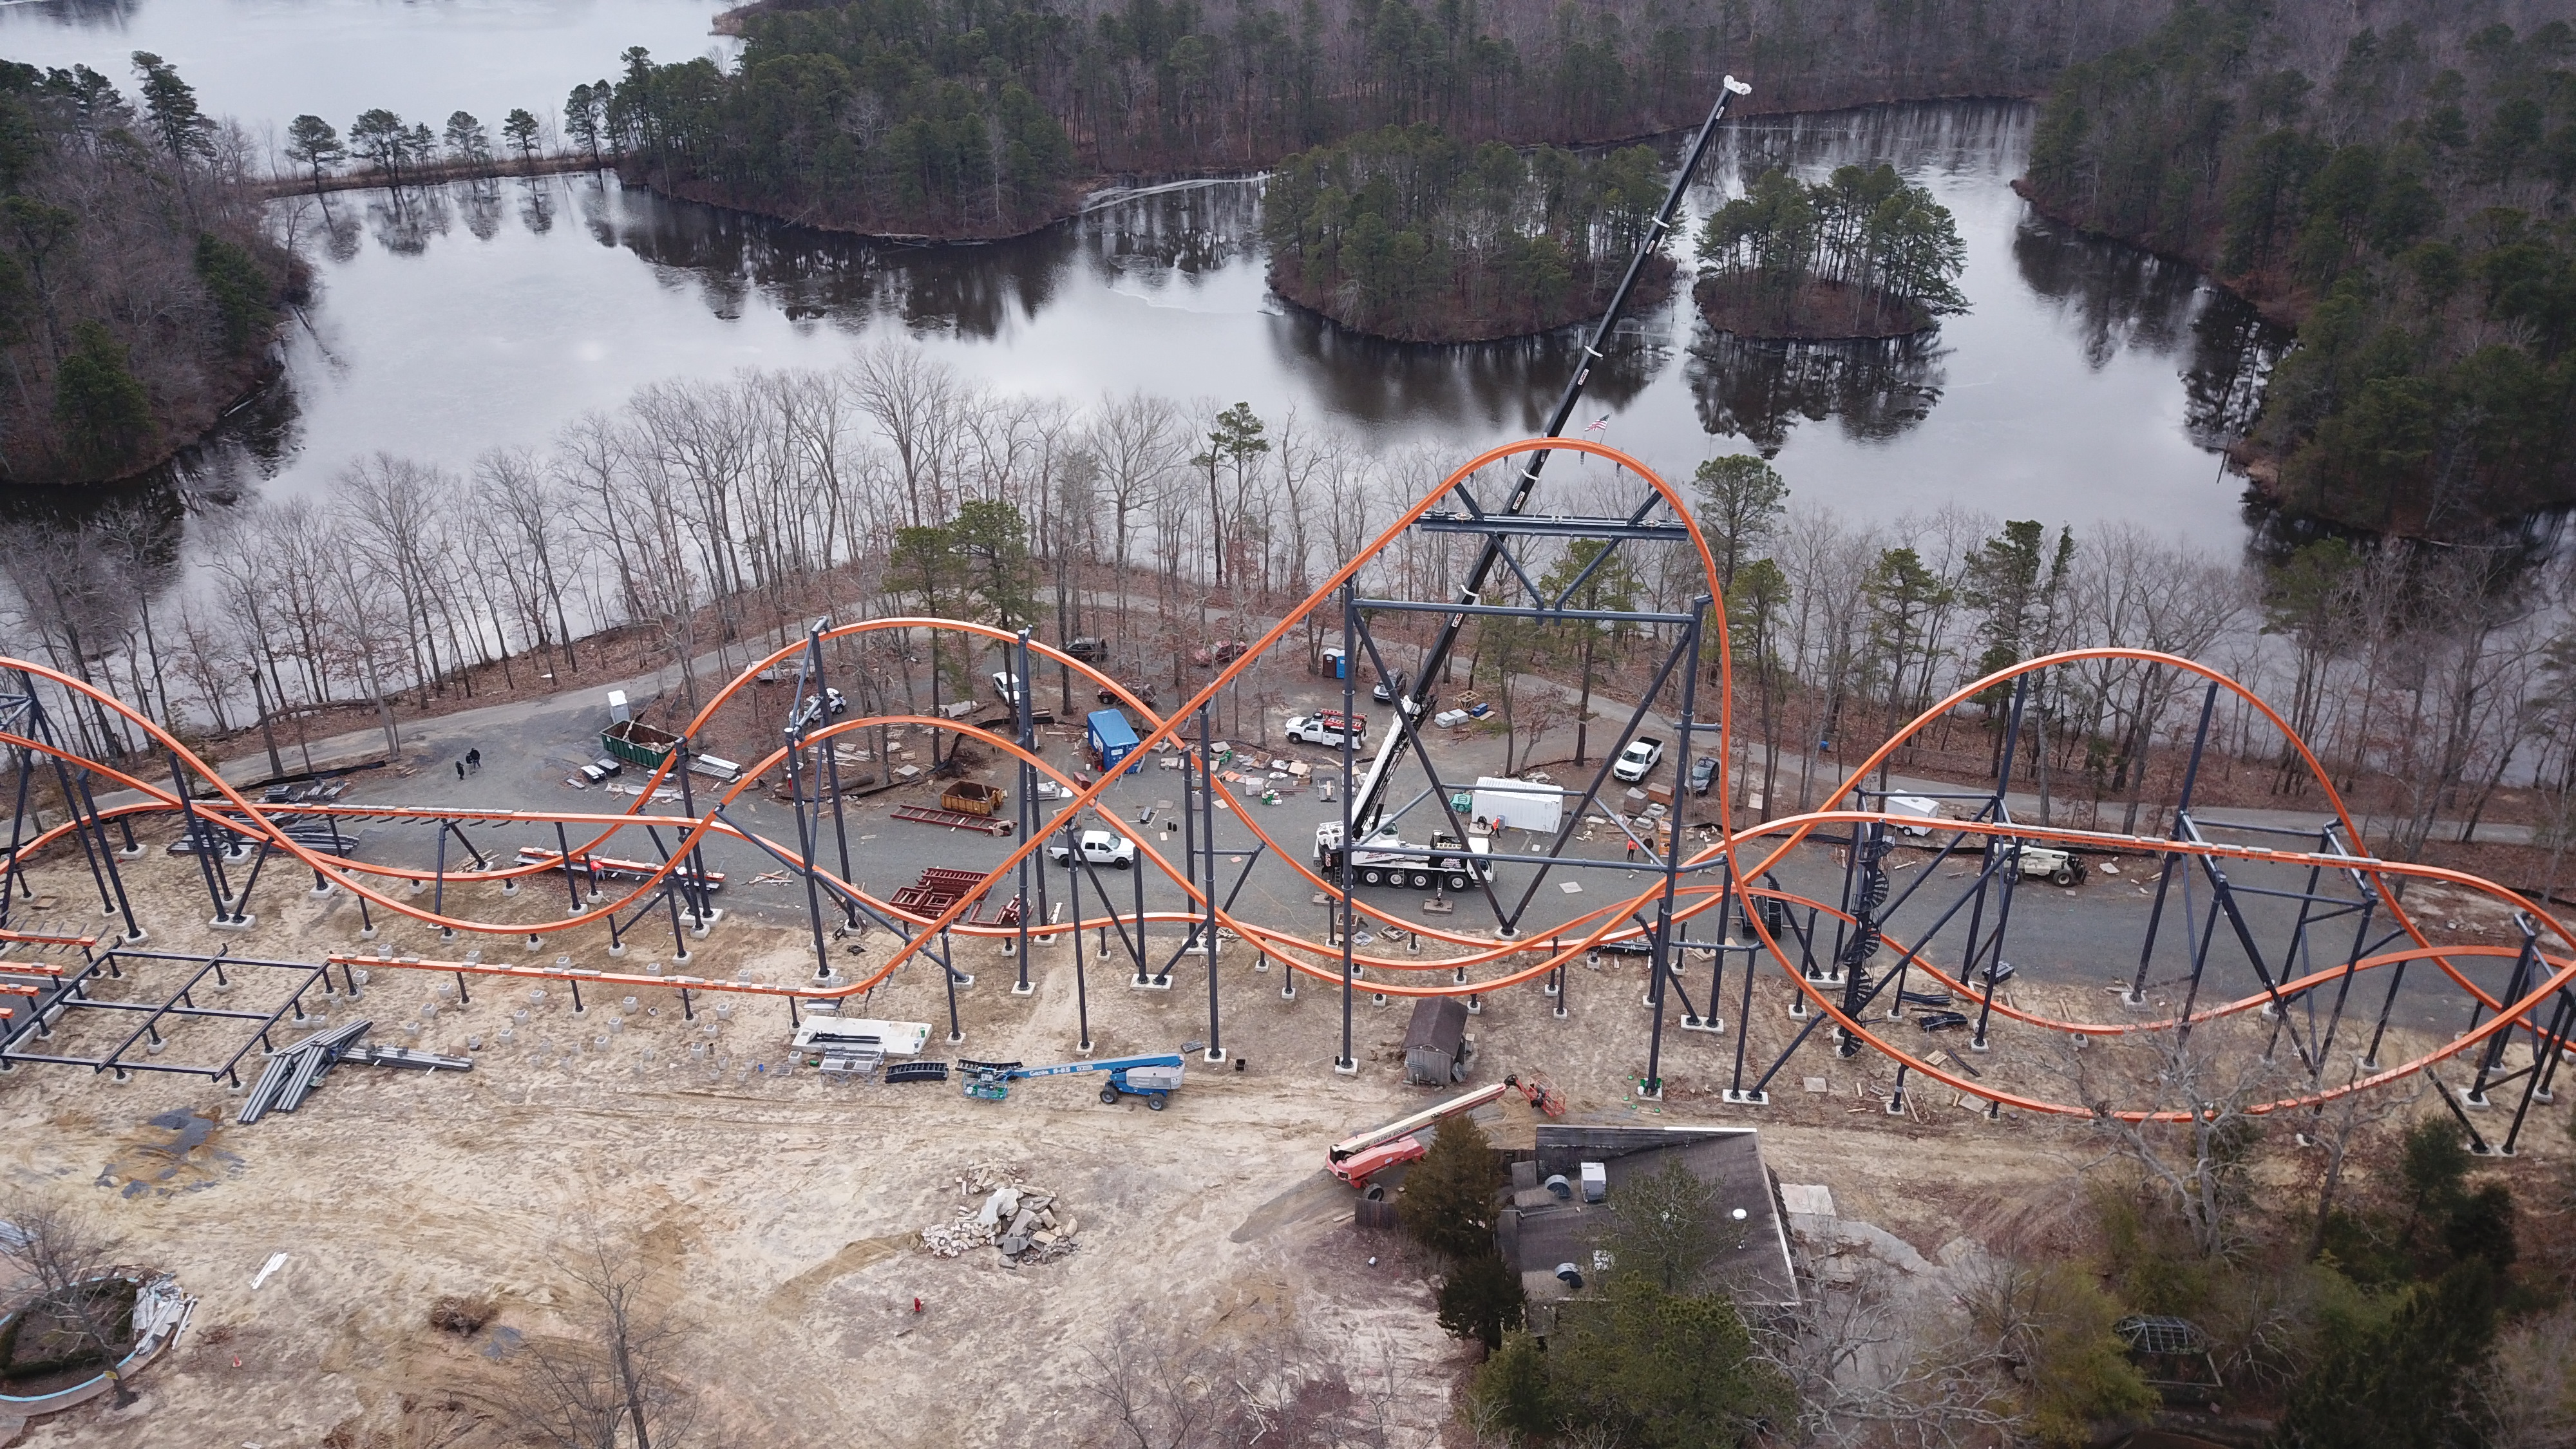 Jersey Devil Coaster coming to Six Flags Great Adventure will be tallest,  fastest, longest roller coaster in world